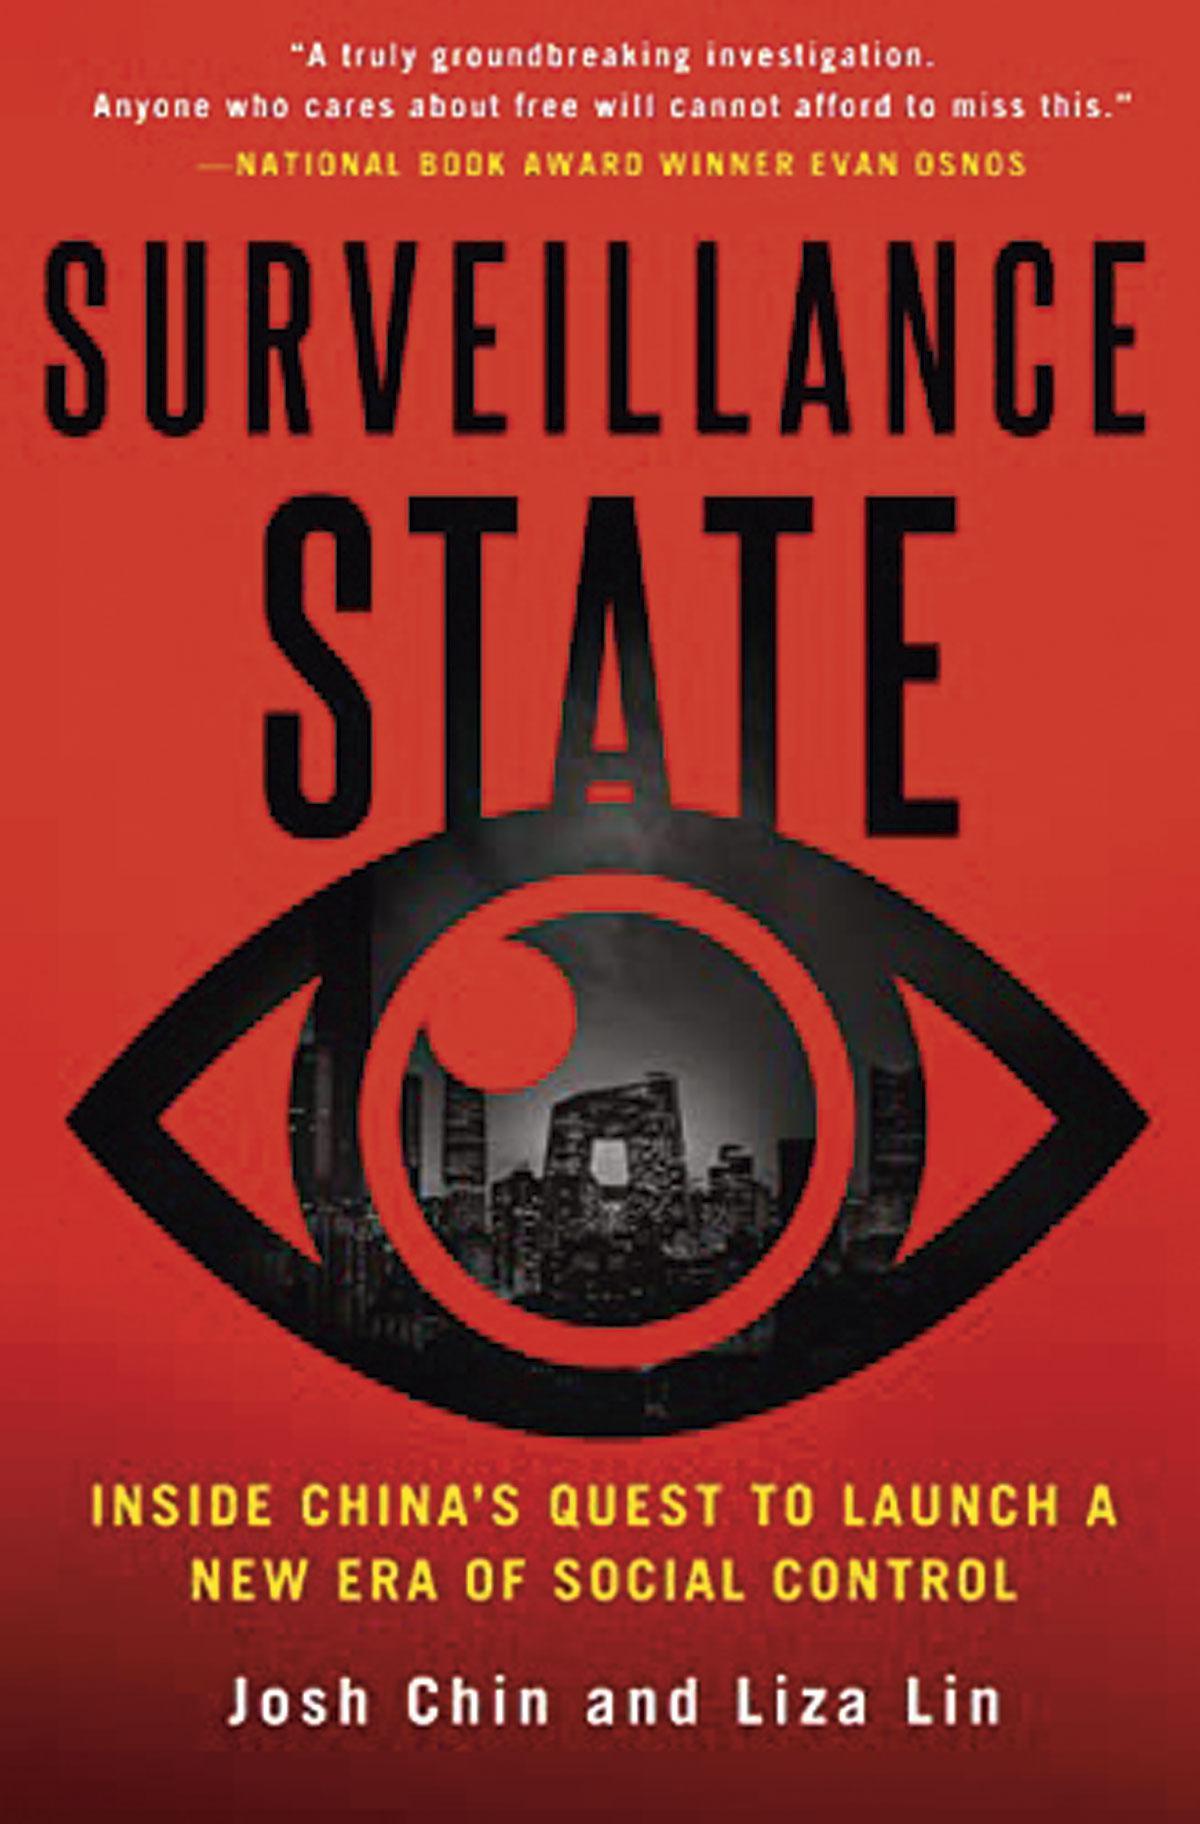 Surveillance State: Inside China’s Quest to Launch a New Era of Social Control, Josh Chin and Liza Lin, St Martin’s Press. 320 blz. 29,99 US dollar/ 28,88 euro.